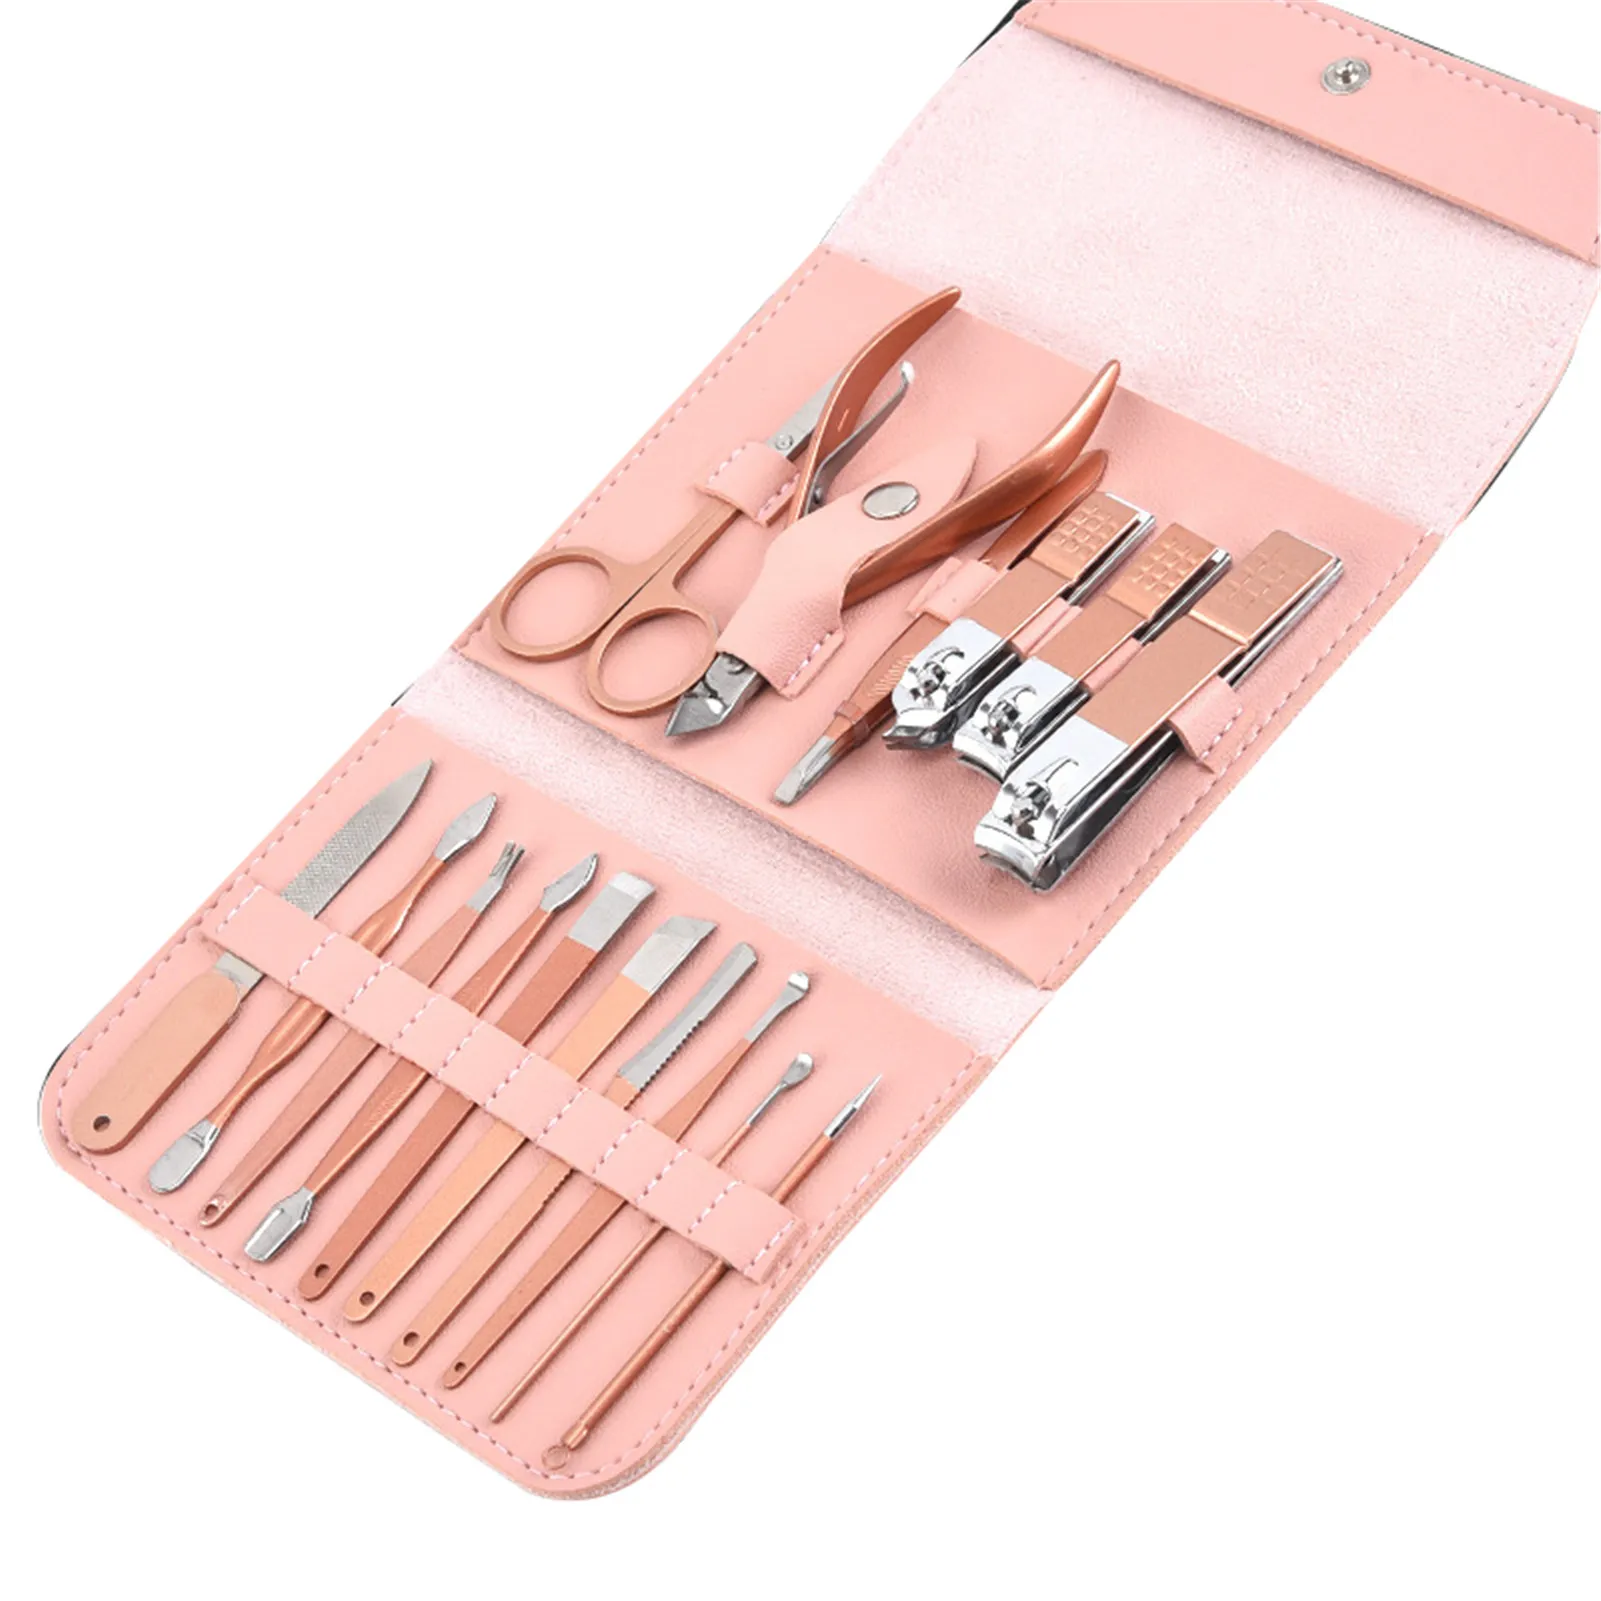 

16pcs Nail Clippers Sets High Precision Stainless Steel Nail Cutter Pedicure Kit Nail File Nail Scissors and Clipper SANA889